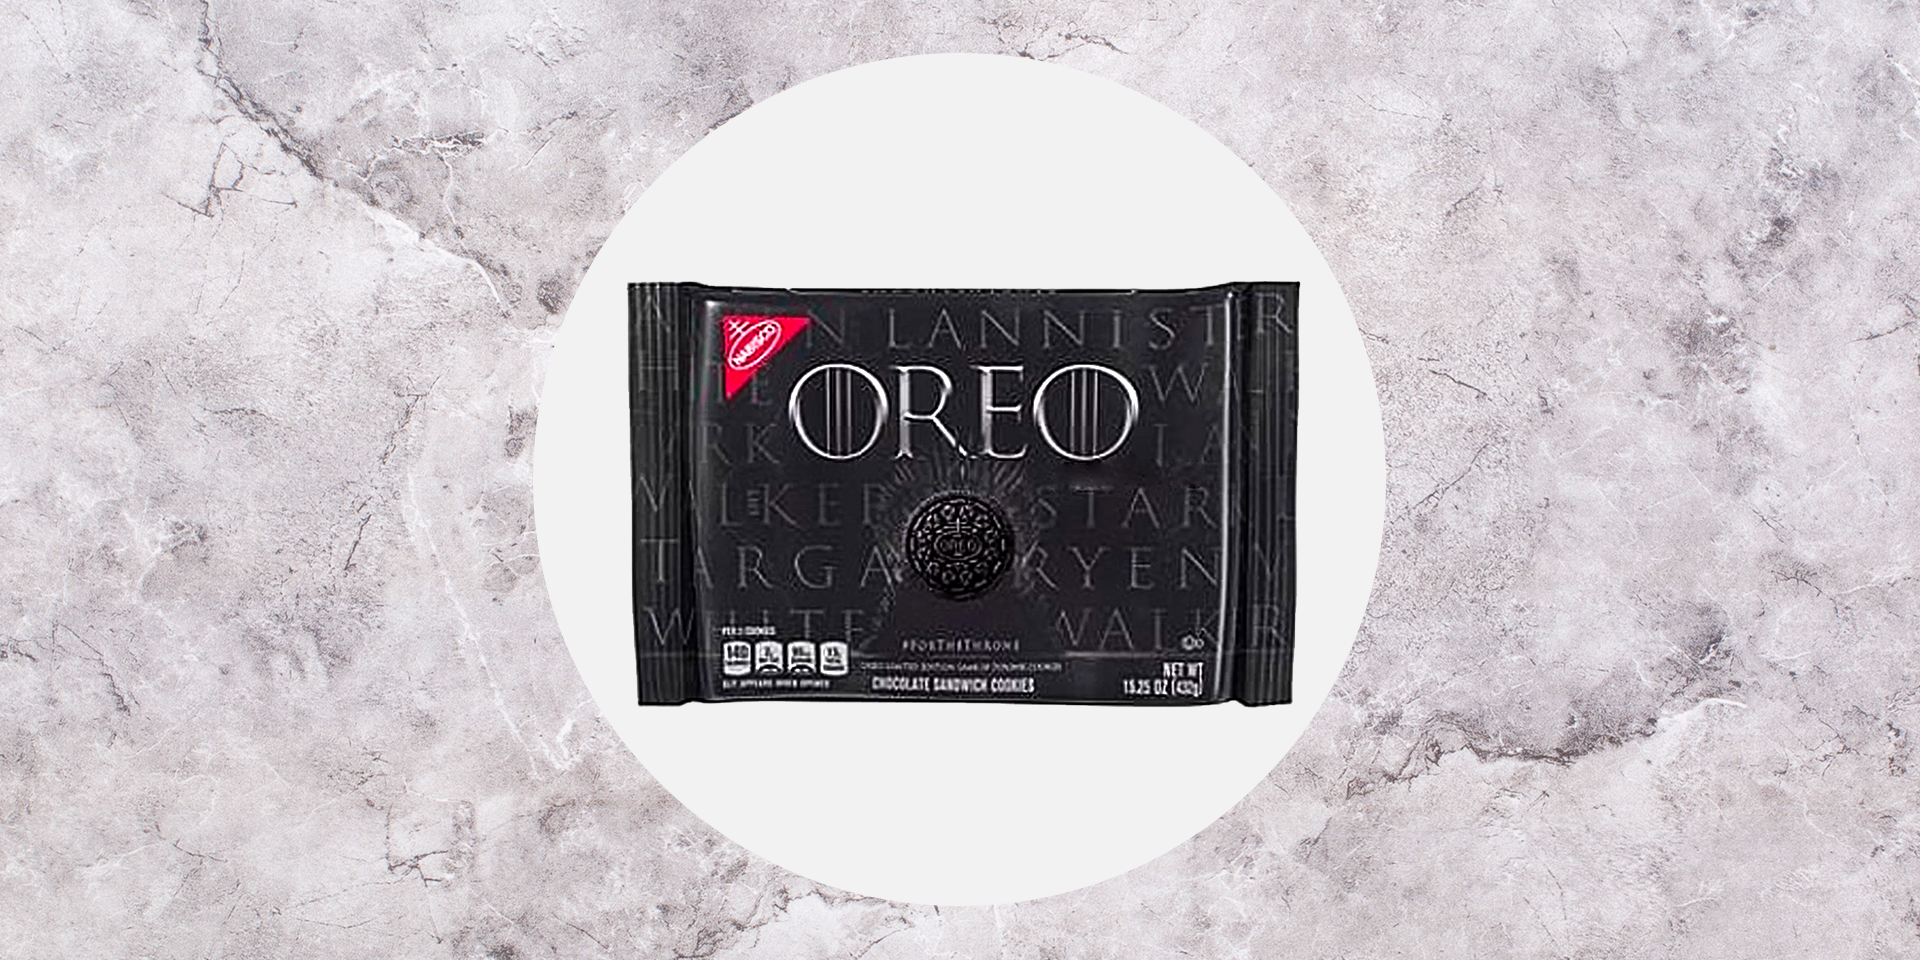 Game Of Thrones Oreo cookies are here